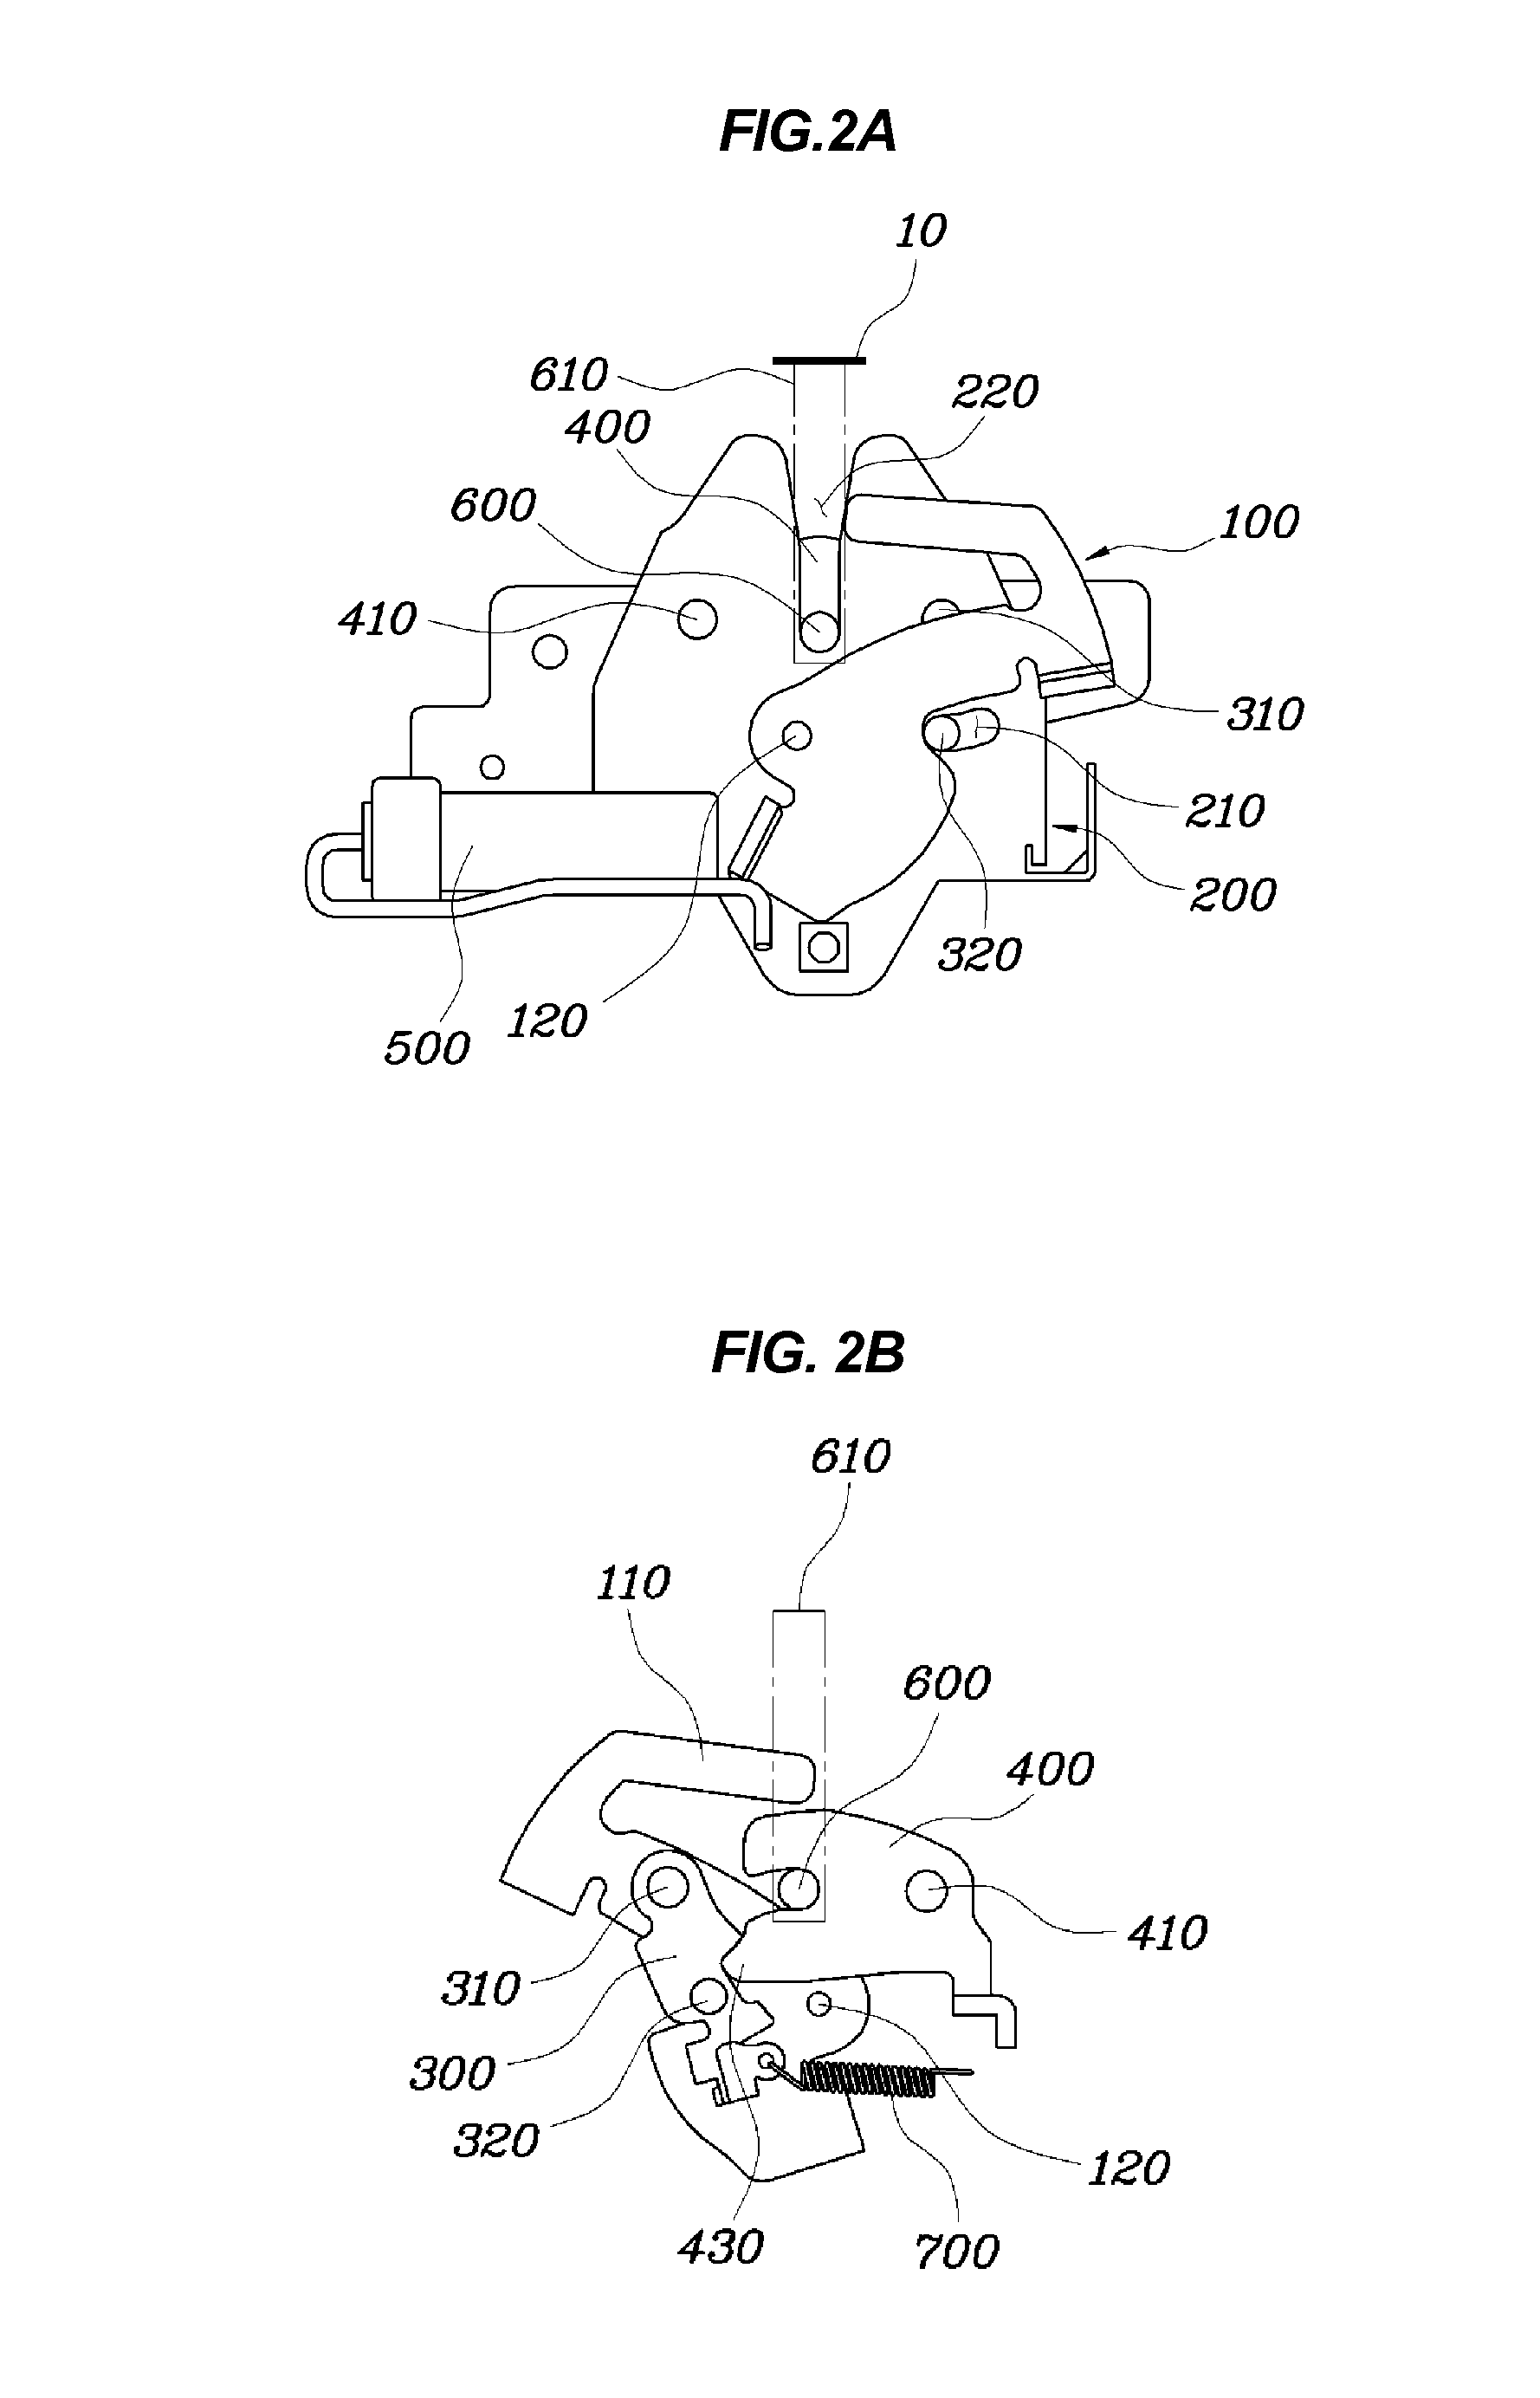 Active hood apparatus for vehicle